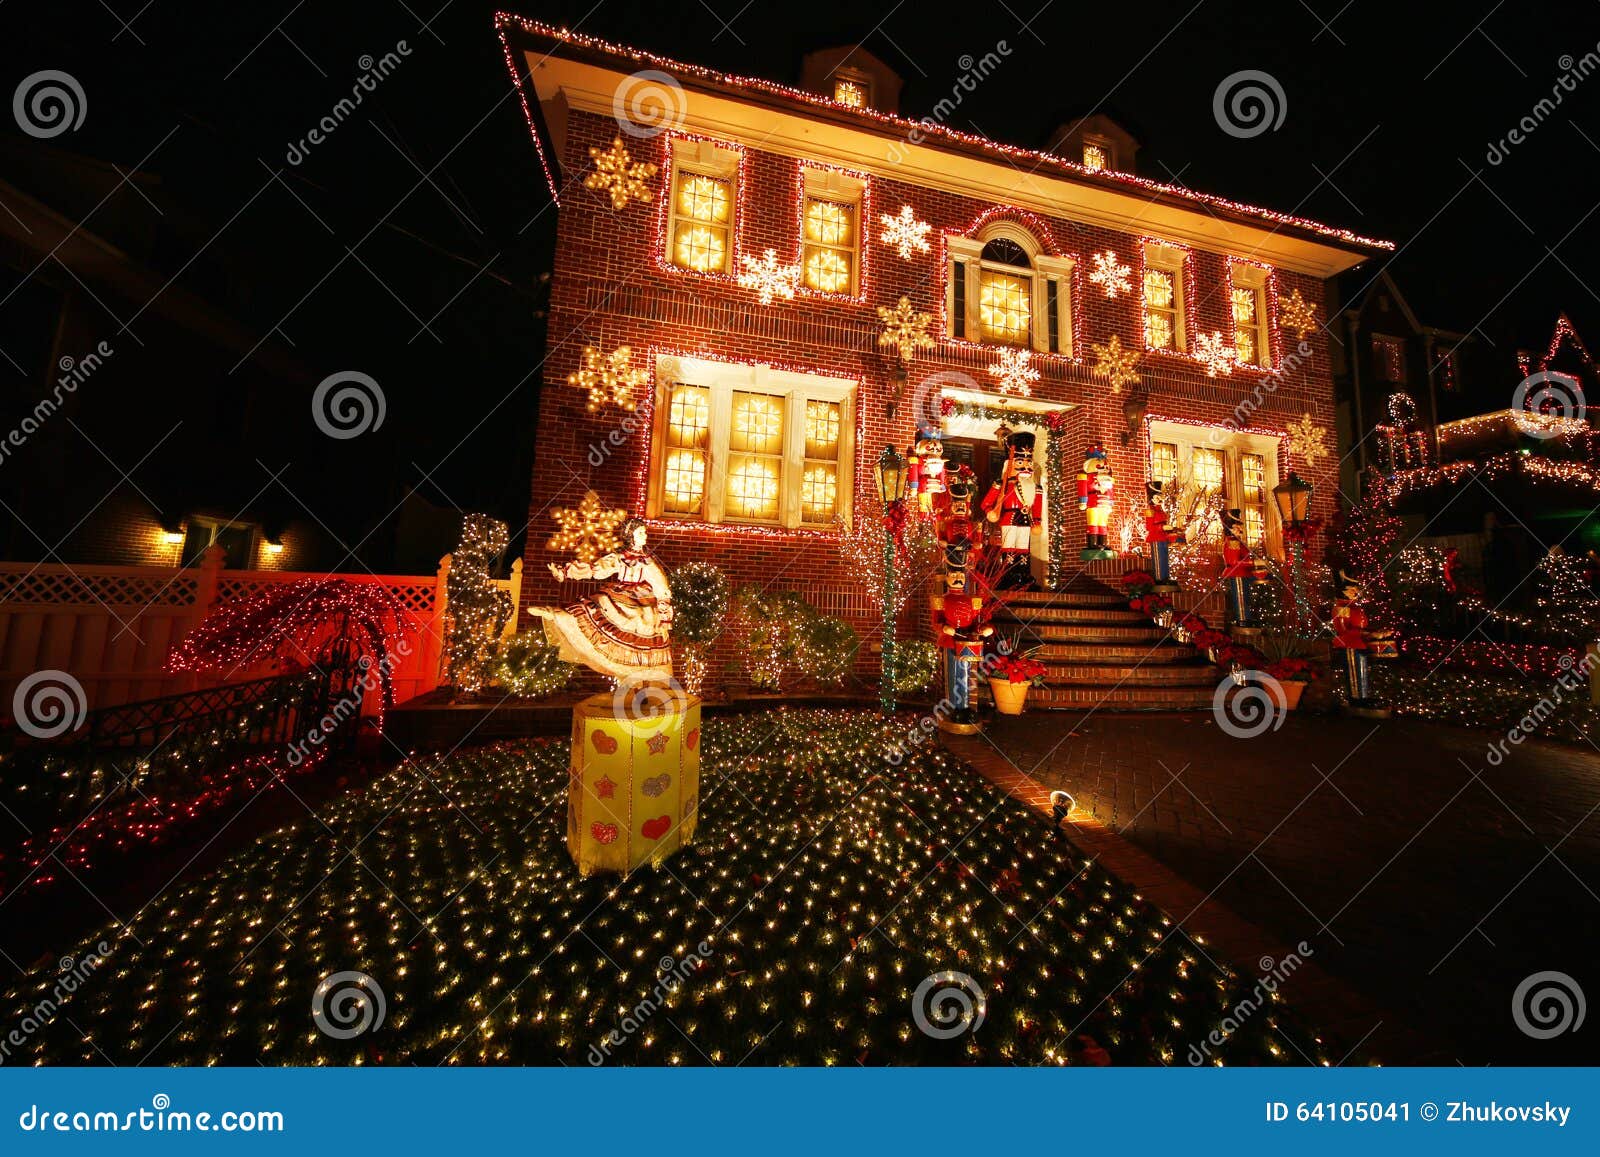 Christmas House Decoration Lights Display In Brooklyn Editorial Photo Image Of Evening Holiday 64105041